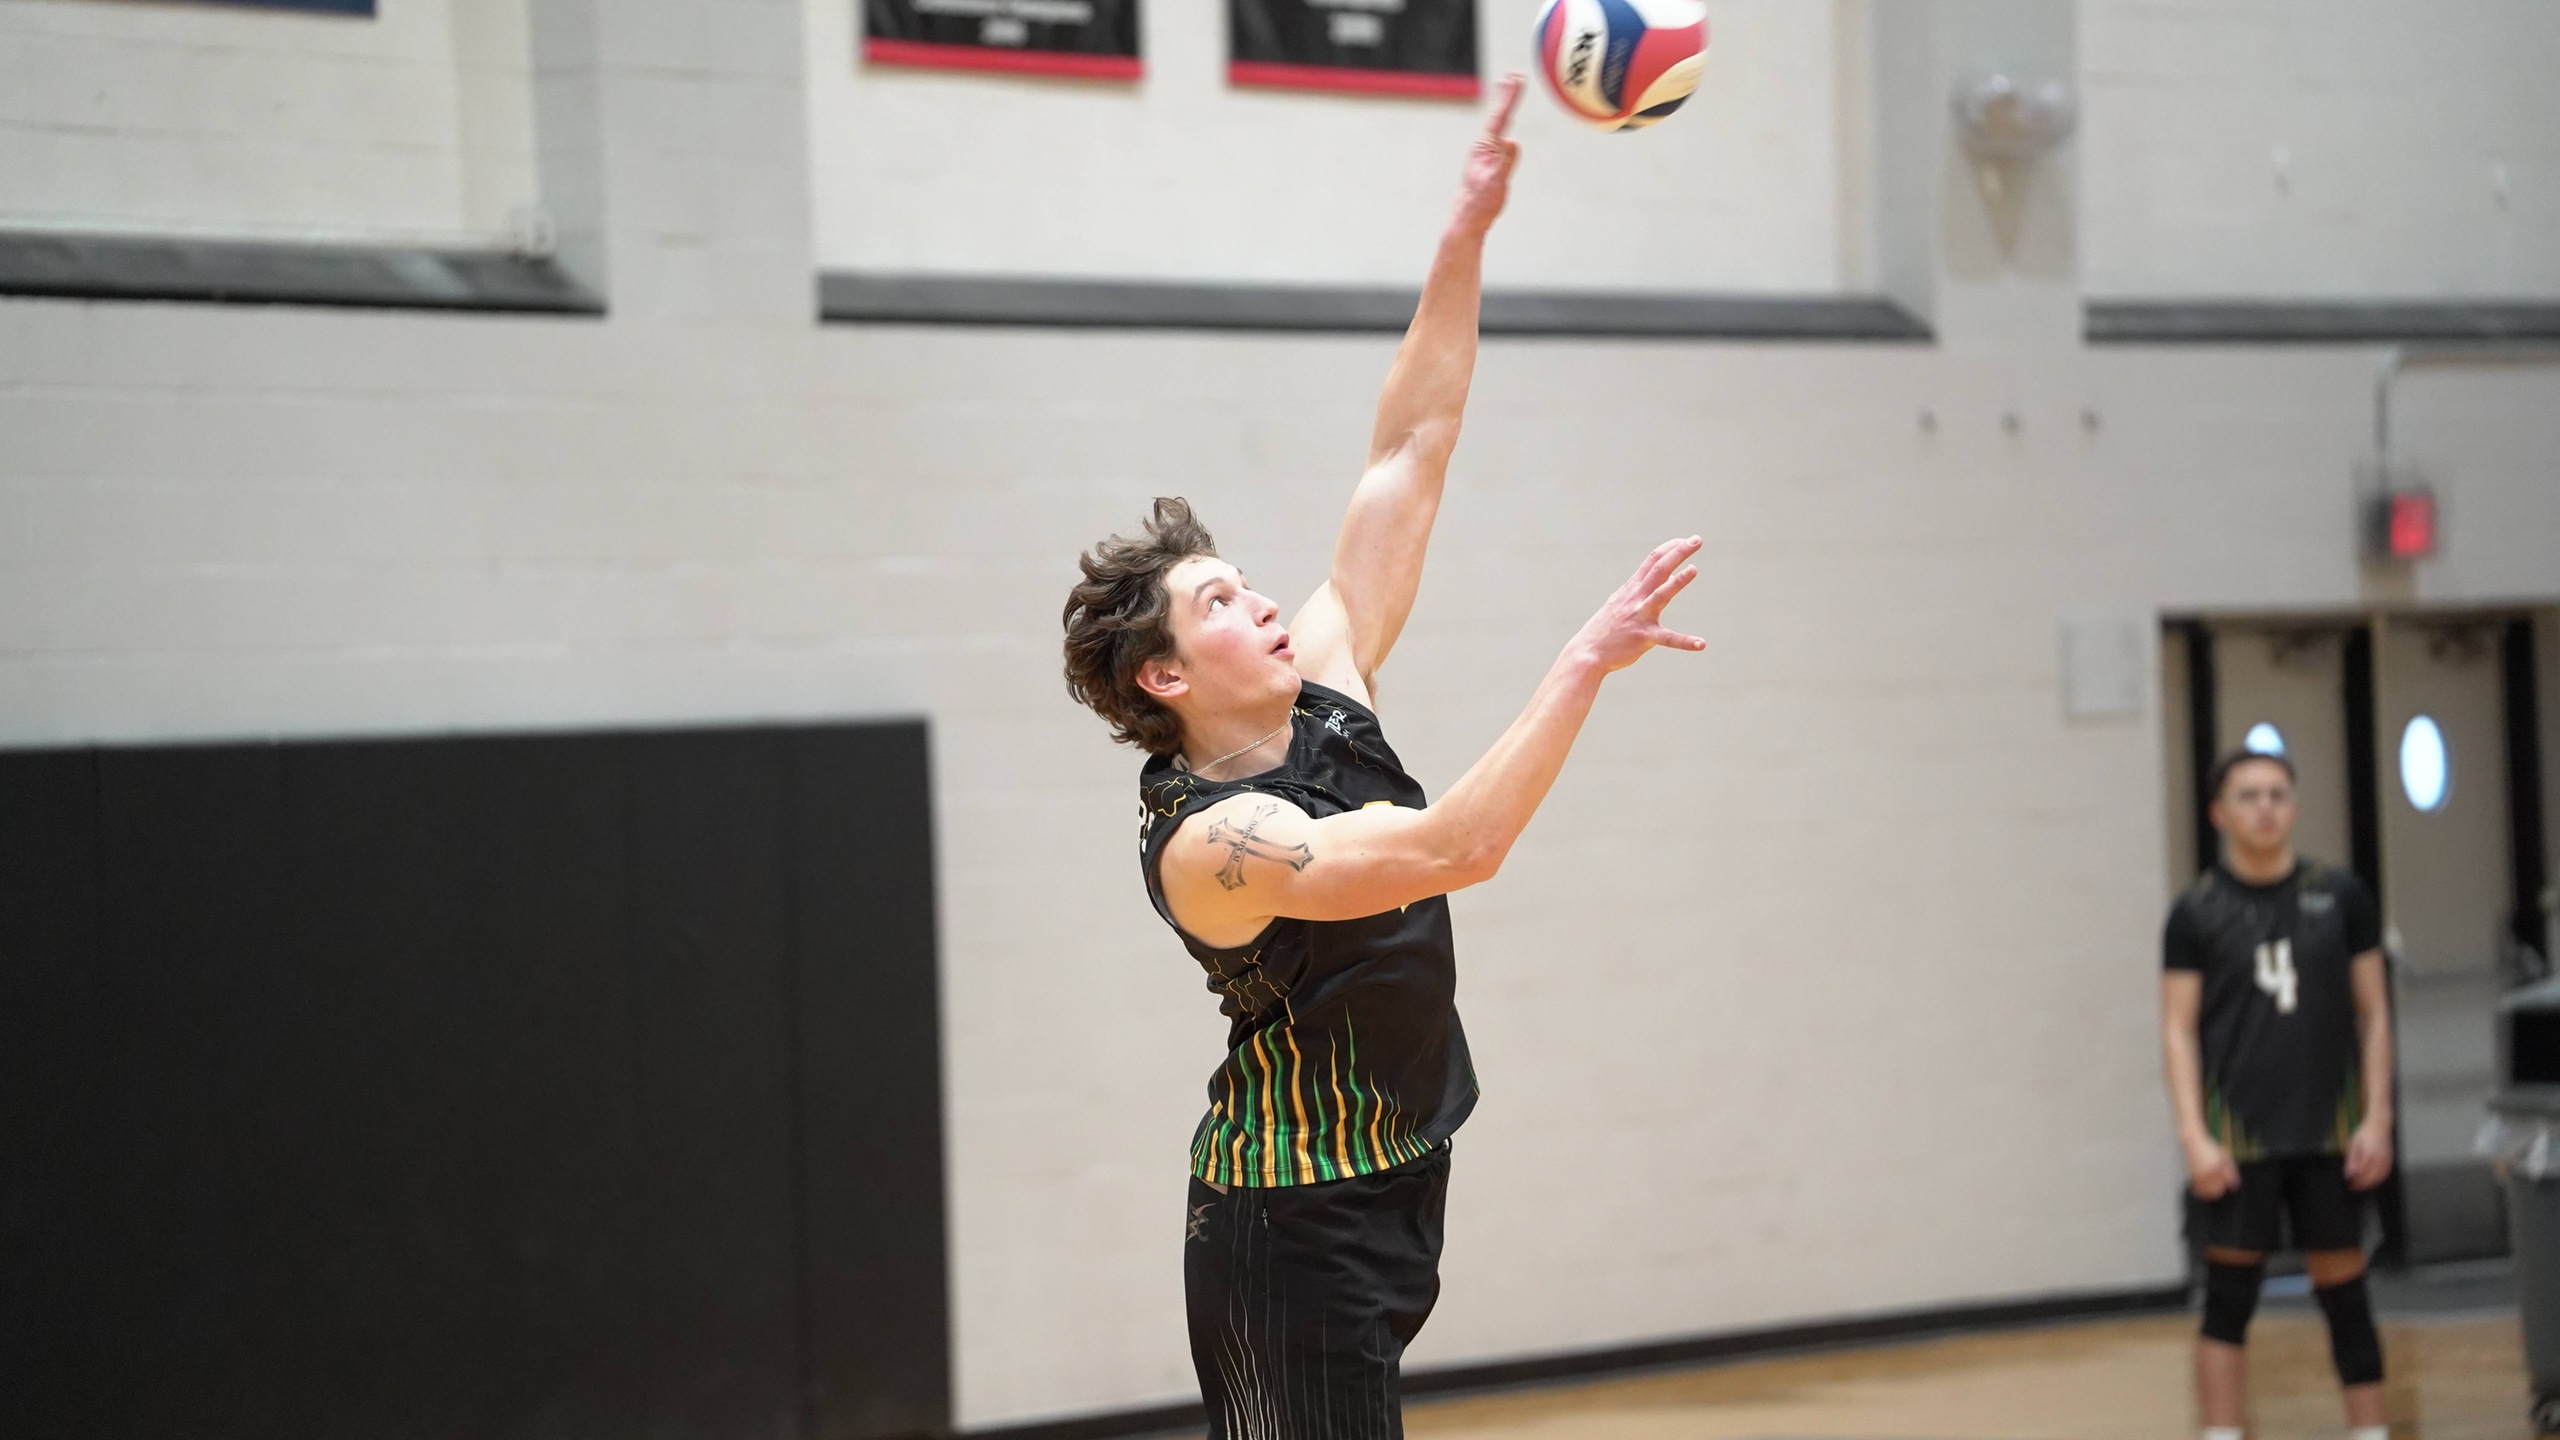 Men’s Volleyball Battles Through a Tough Home Loss to No. 1 Wentworth